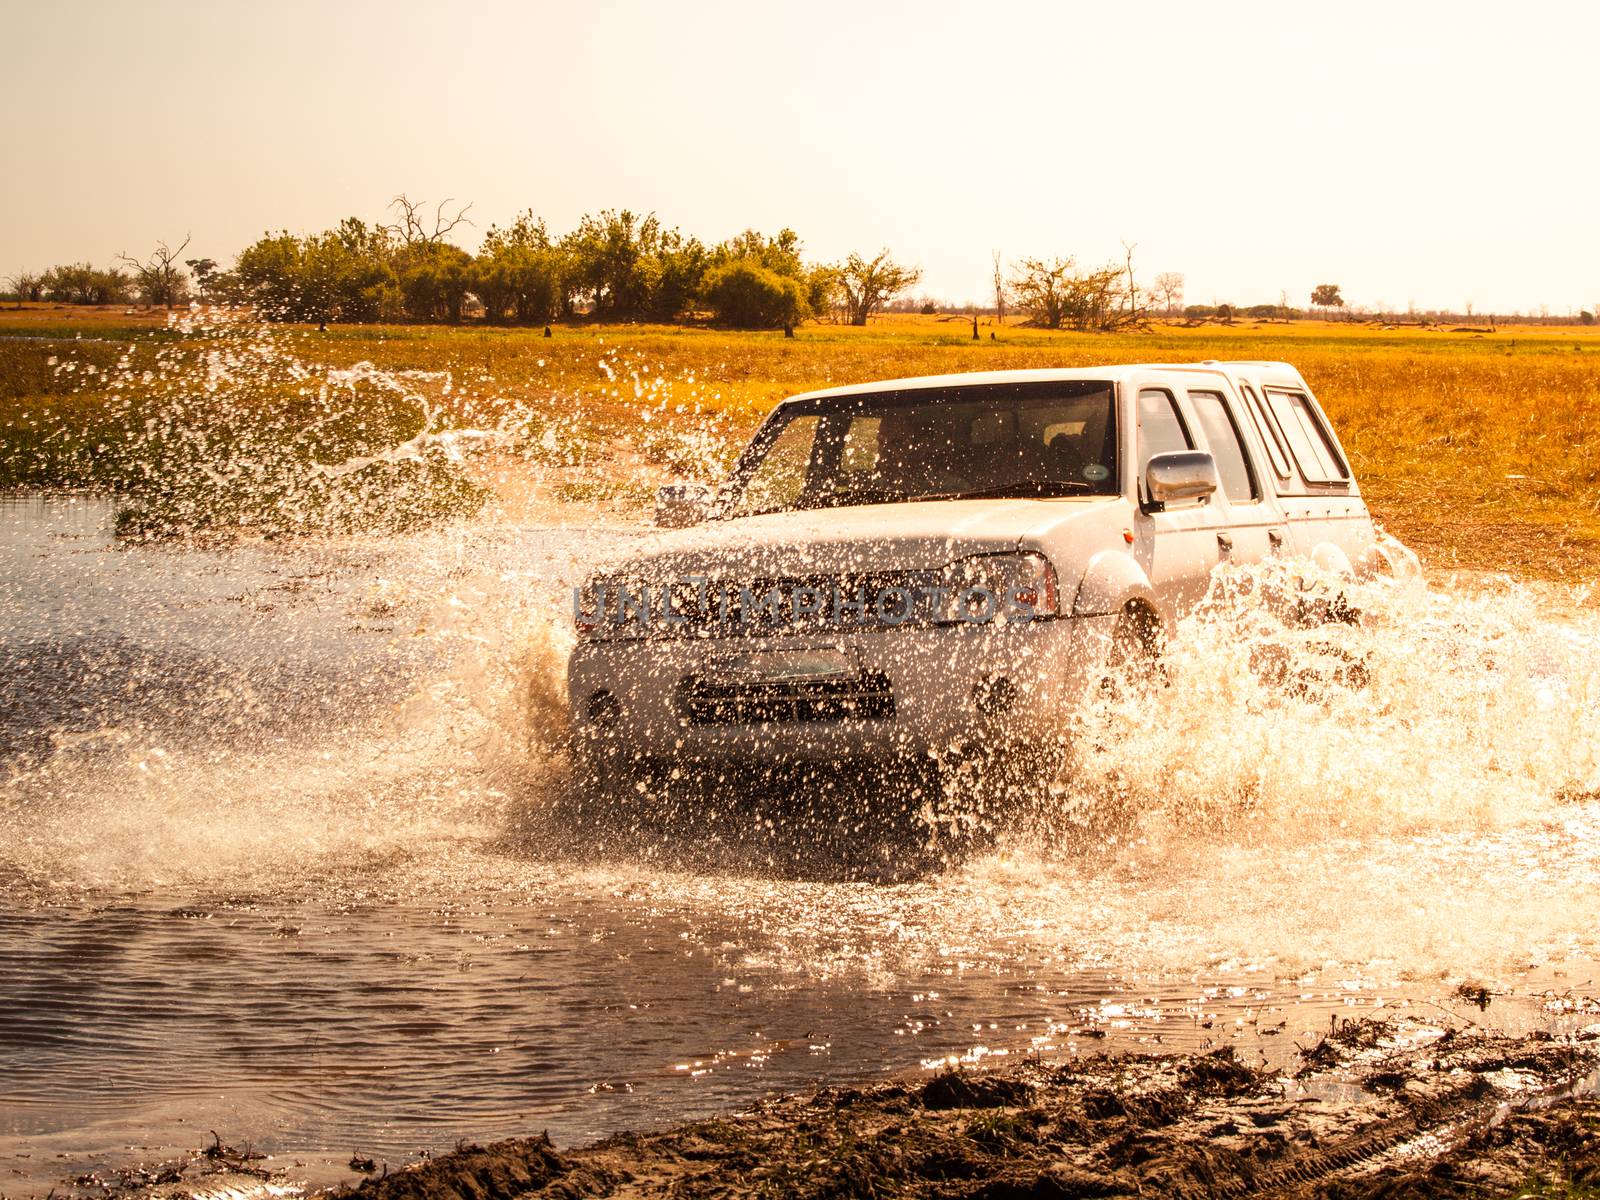 Off-road car fording water on safari wild drive in Chobe National Park, Botswana, Africa by pyty